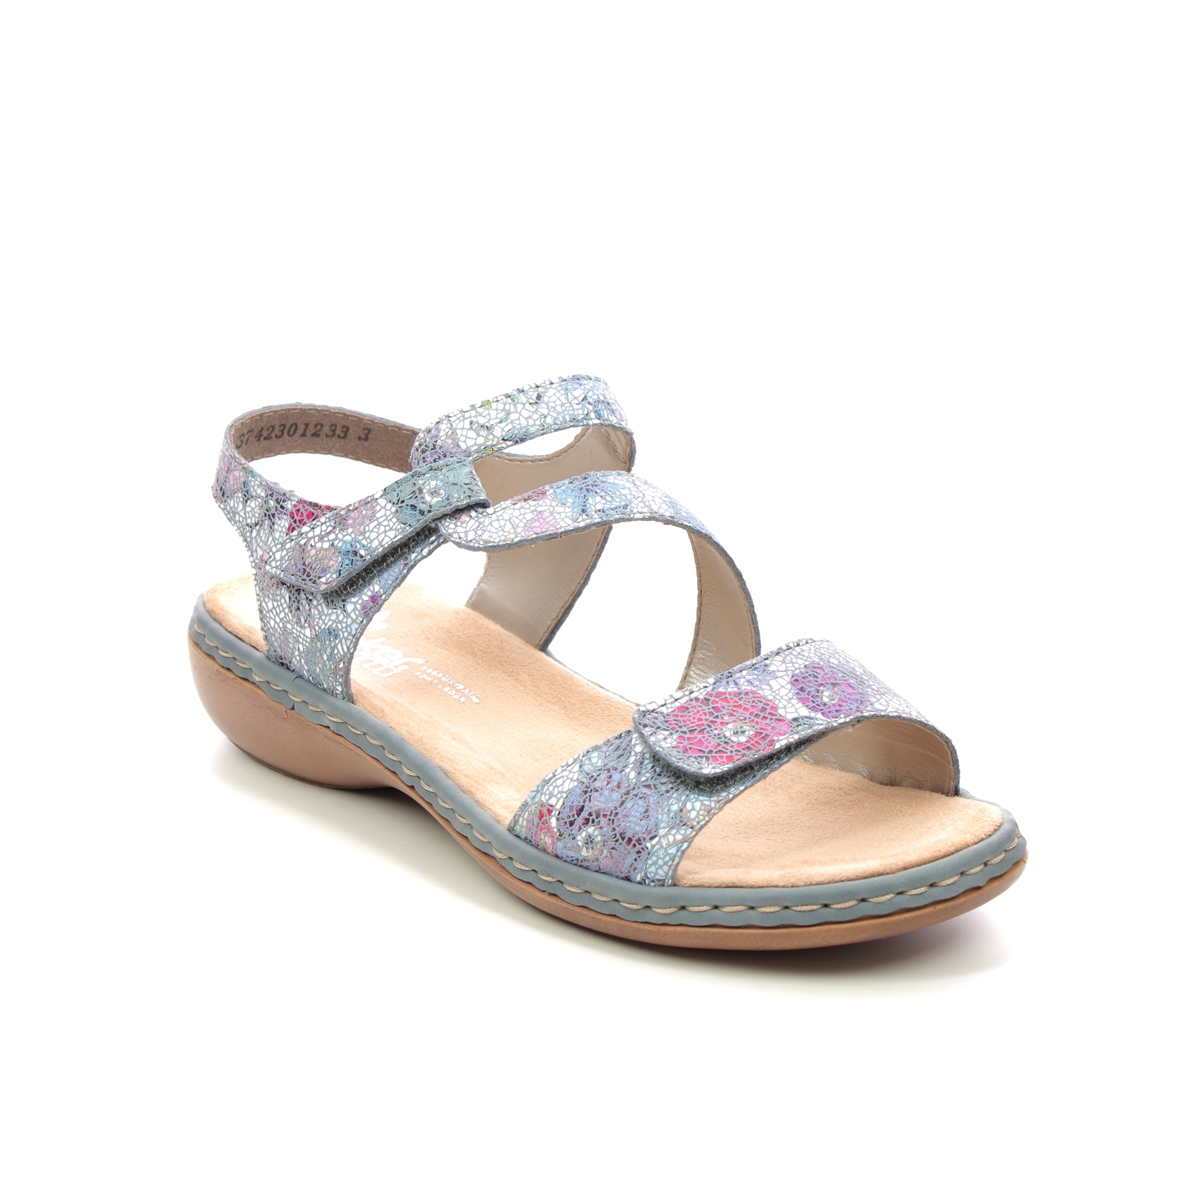 Rieker 659C7-90 Blue Floral Womens Comfortable Sandals in a Plain Leather in Size 42